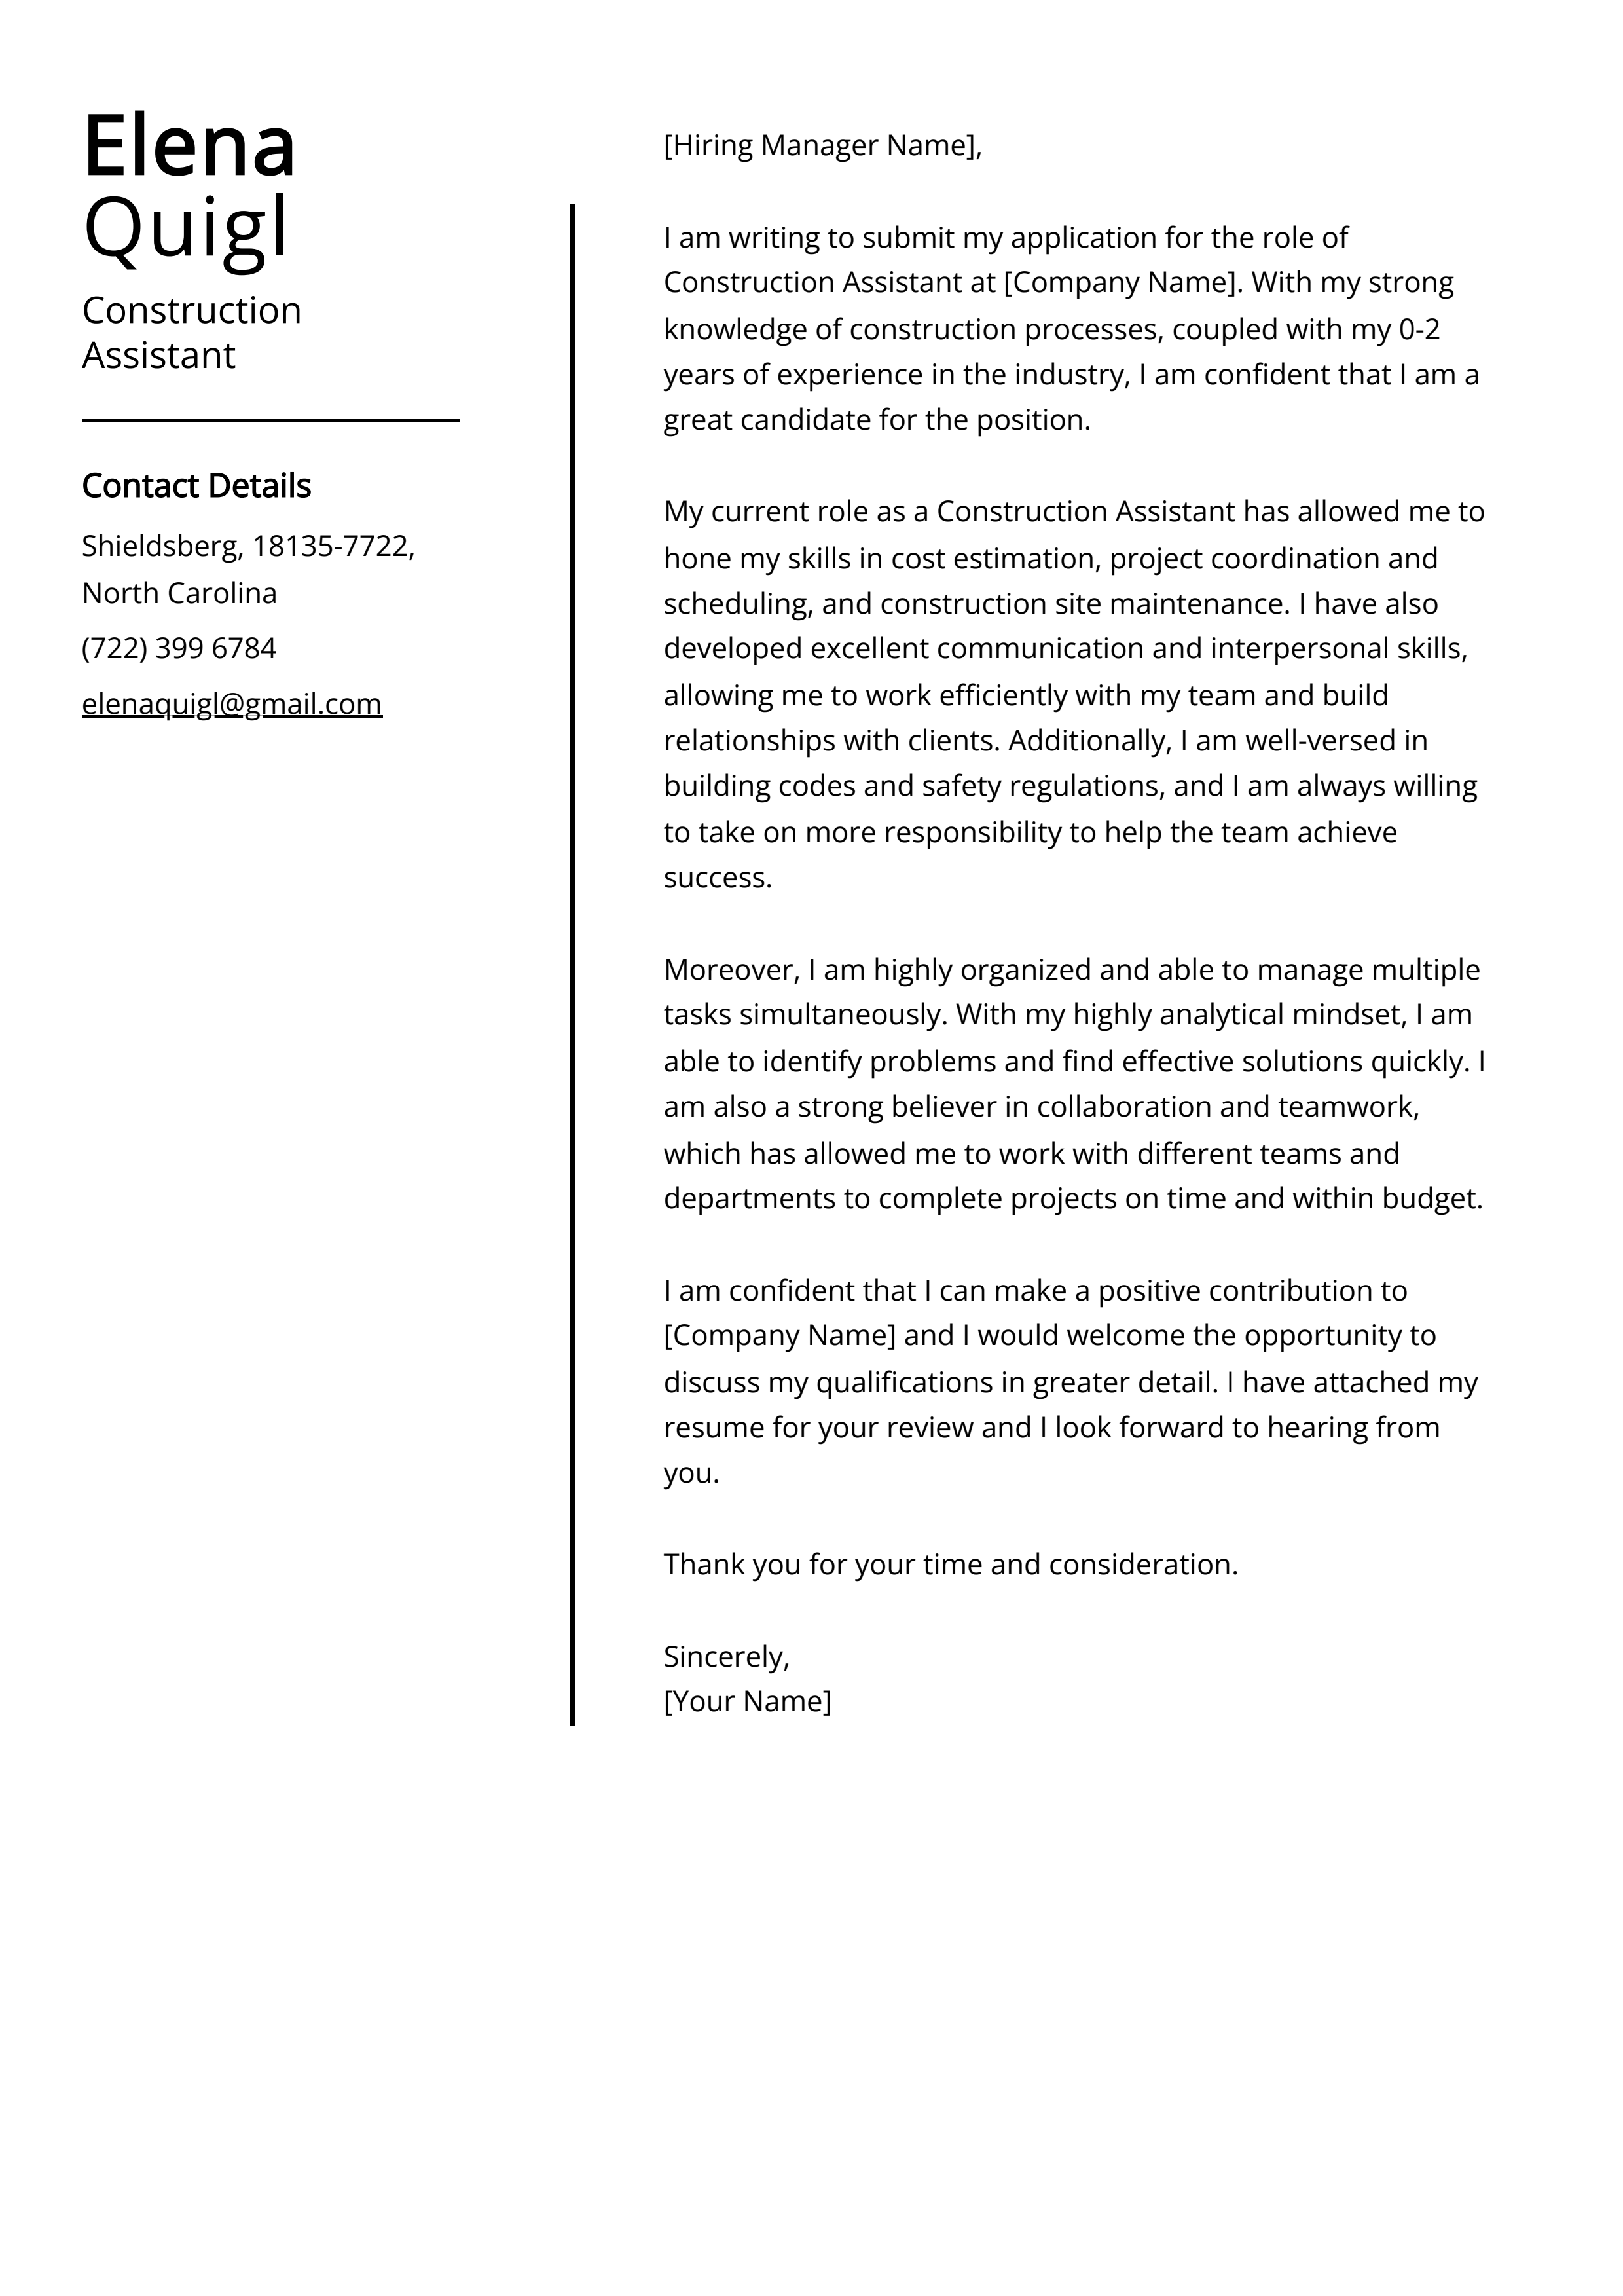 Construction Assistant Cover Letter Example